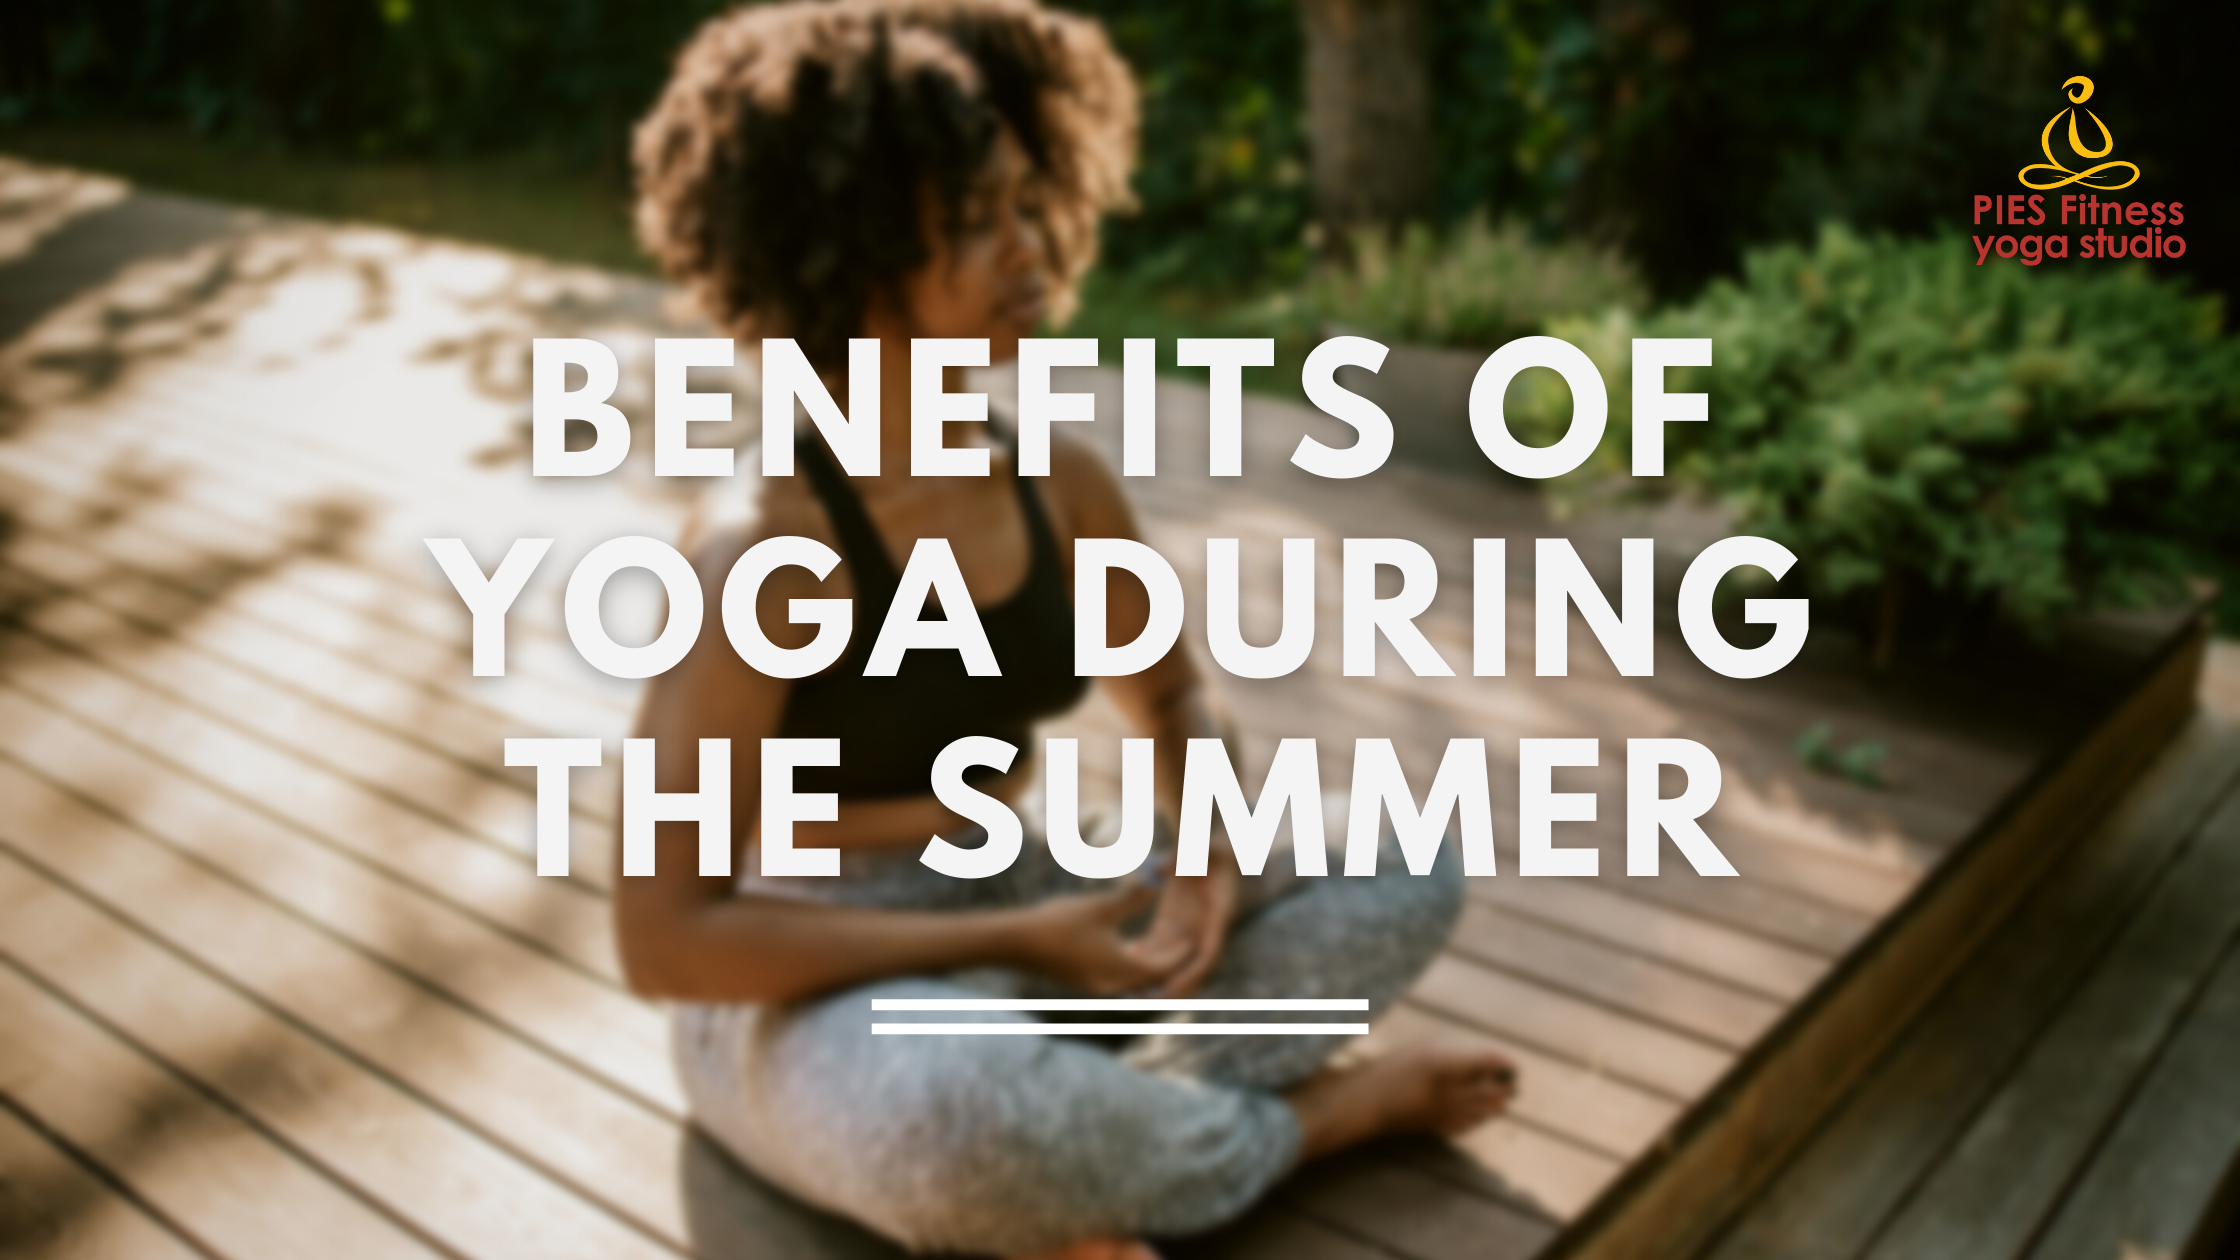 BENEFITS OF YOGA DURING THE SUMMER